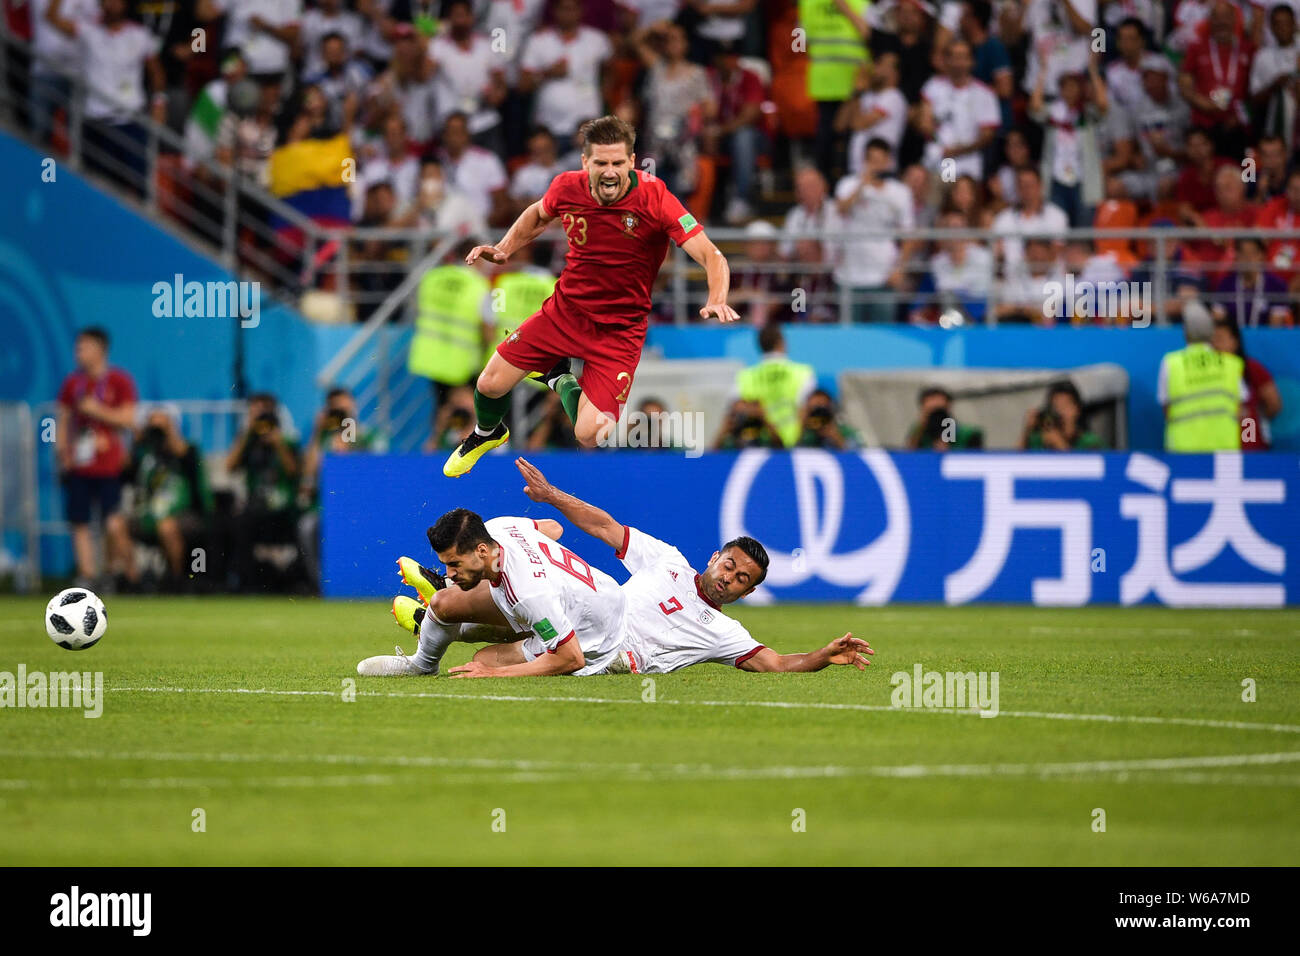 Adrien Silva of Portugal, top, challenges players of Iran in their Group B match during the 2018 FIFA World Cup in Saransk, Russia, 25 June 2018.   Af Stock Photo